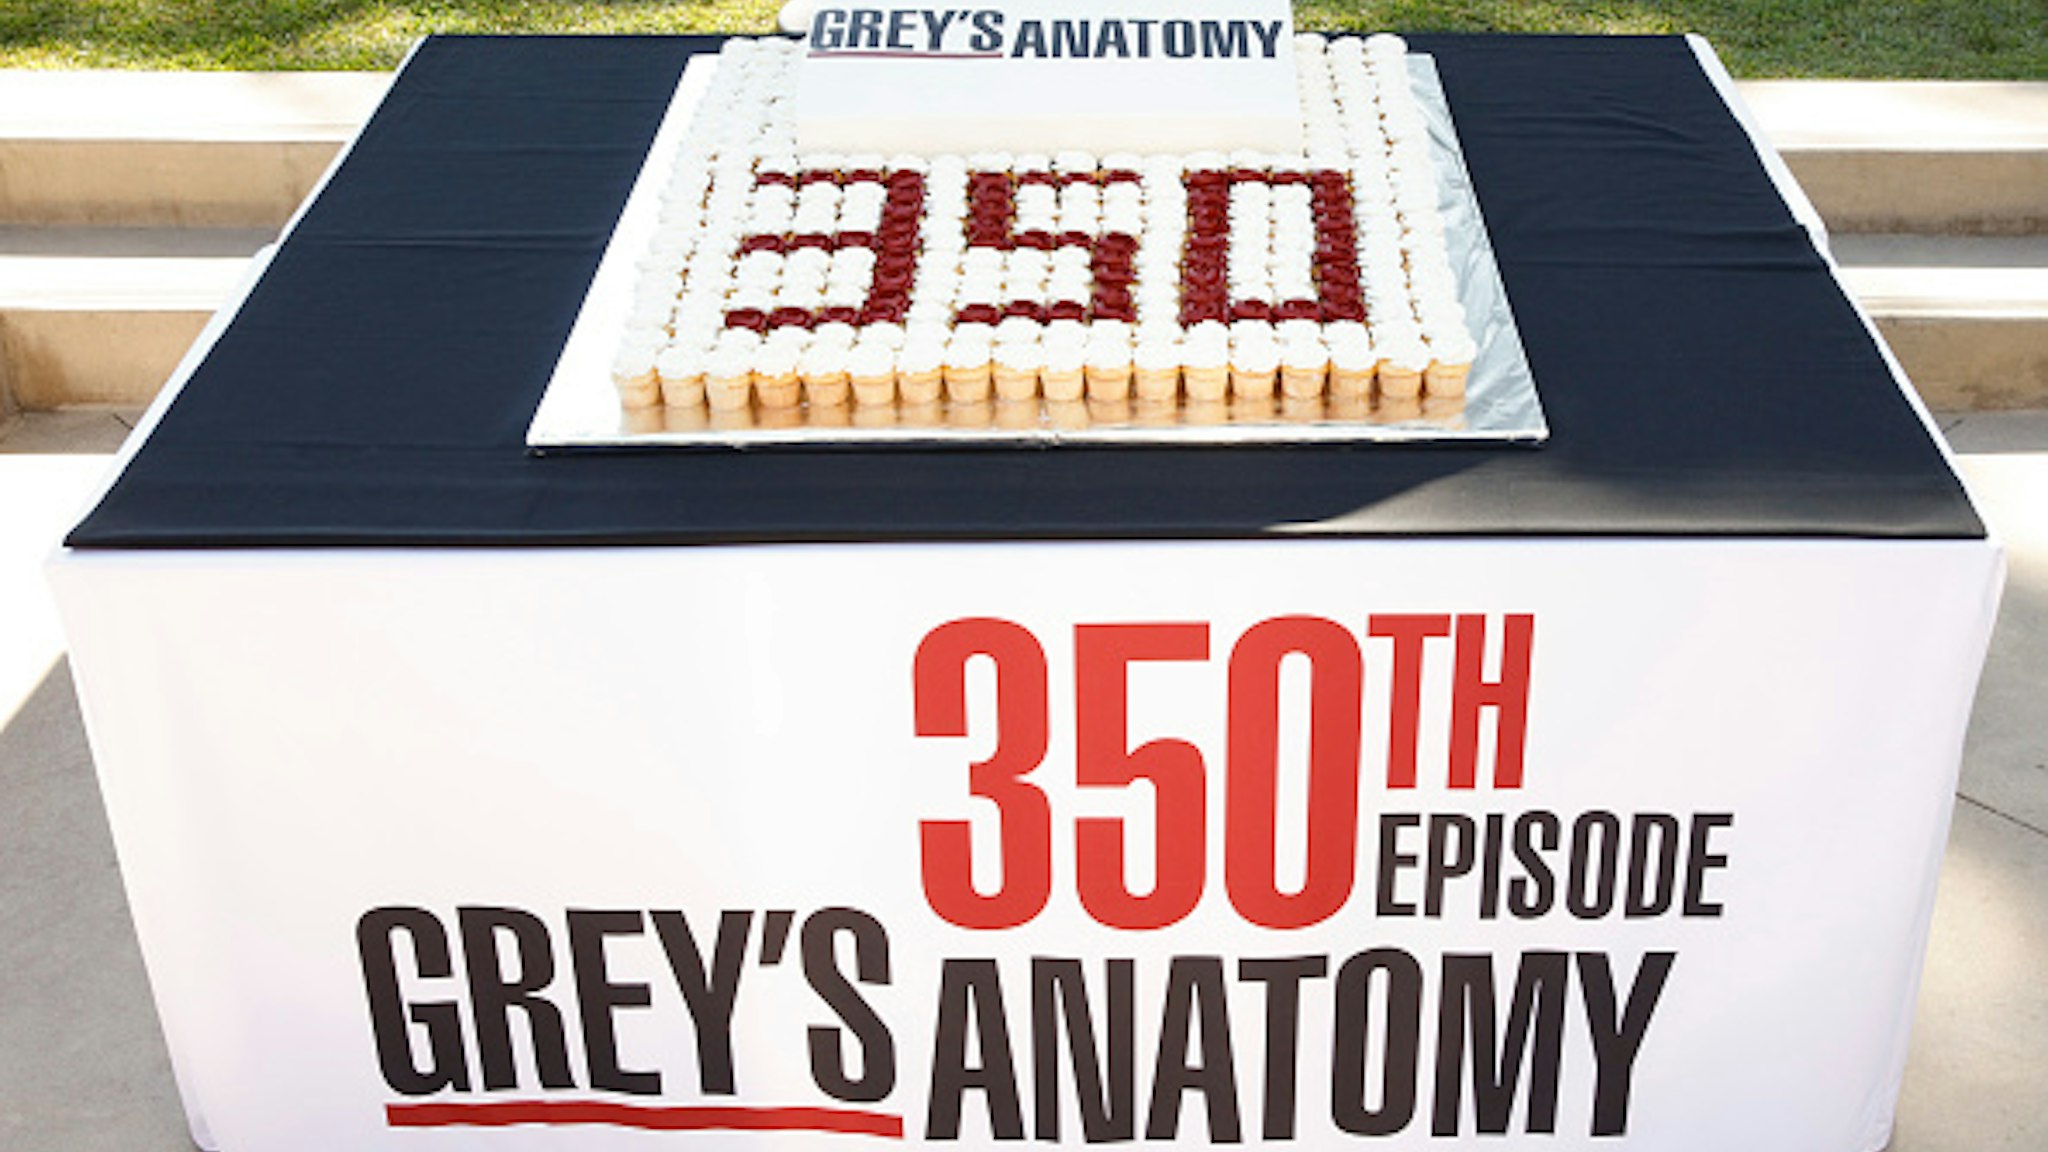 GREY'S ANATOMY - The stars and executive producers of ABC's "Grey's Anatomy" along with President of ABC Entertainment, Karey Burke, celebrate the taping of the 350th episode with a cake-cutting ceremony in Los Angeles on Tuesday, October 15, 2019. The episode will air later this season. "Grey's Anatomy" airs Thursdays at 8:00pm ET|PT on ABC.